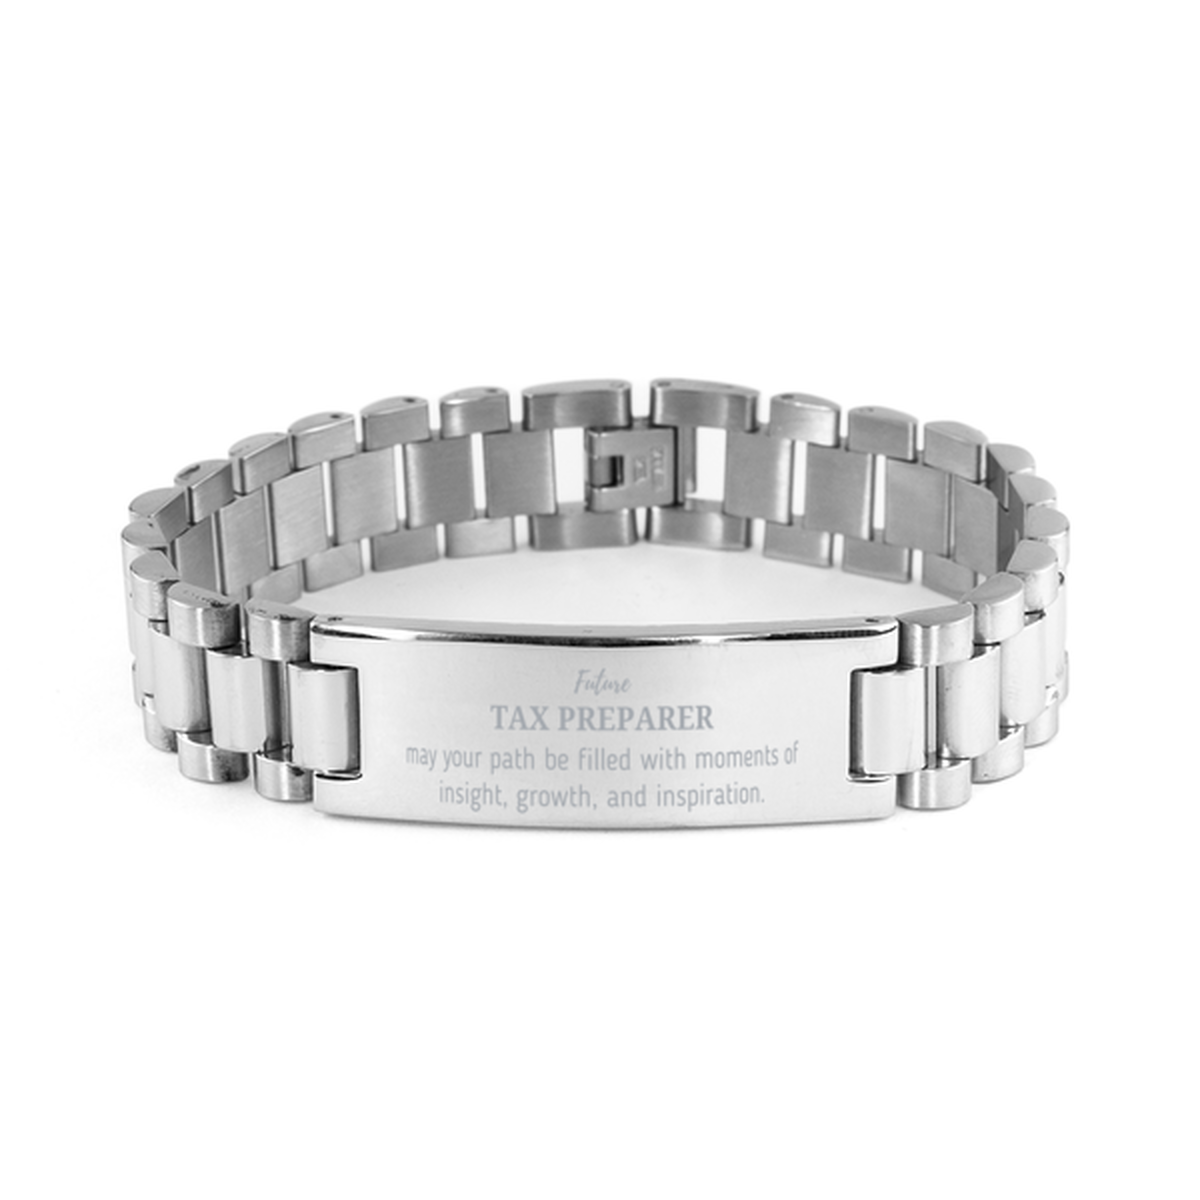 Future Tax Preparer Gifts, May your path be filled with moments of insight, Graduation Gifts for New Tax Preparer, Christmas Unique Ladder Stainless Steel Bracelet For Men, Women, Friends